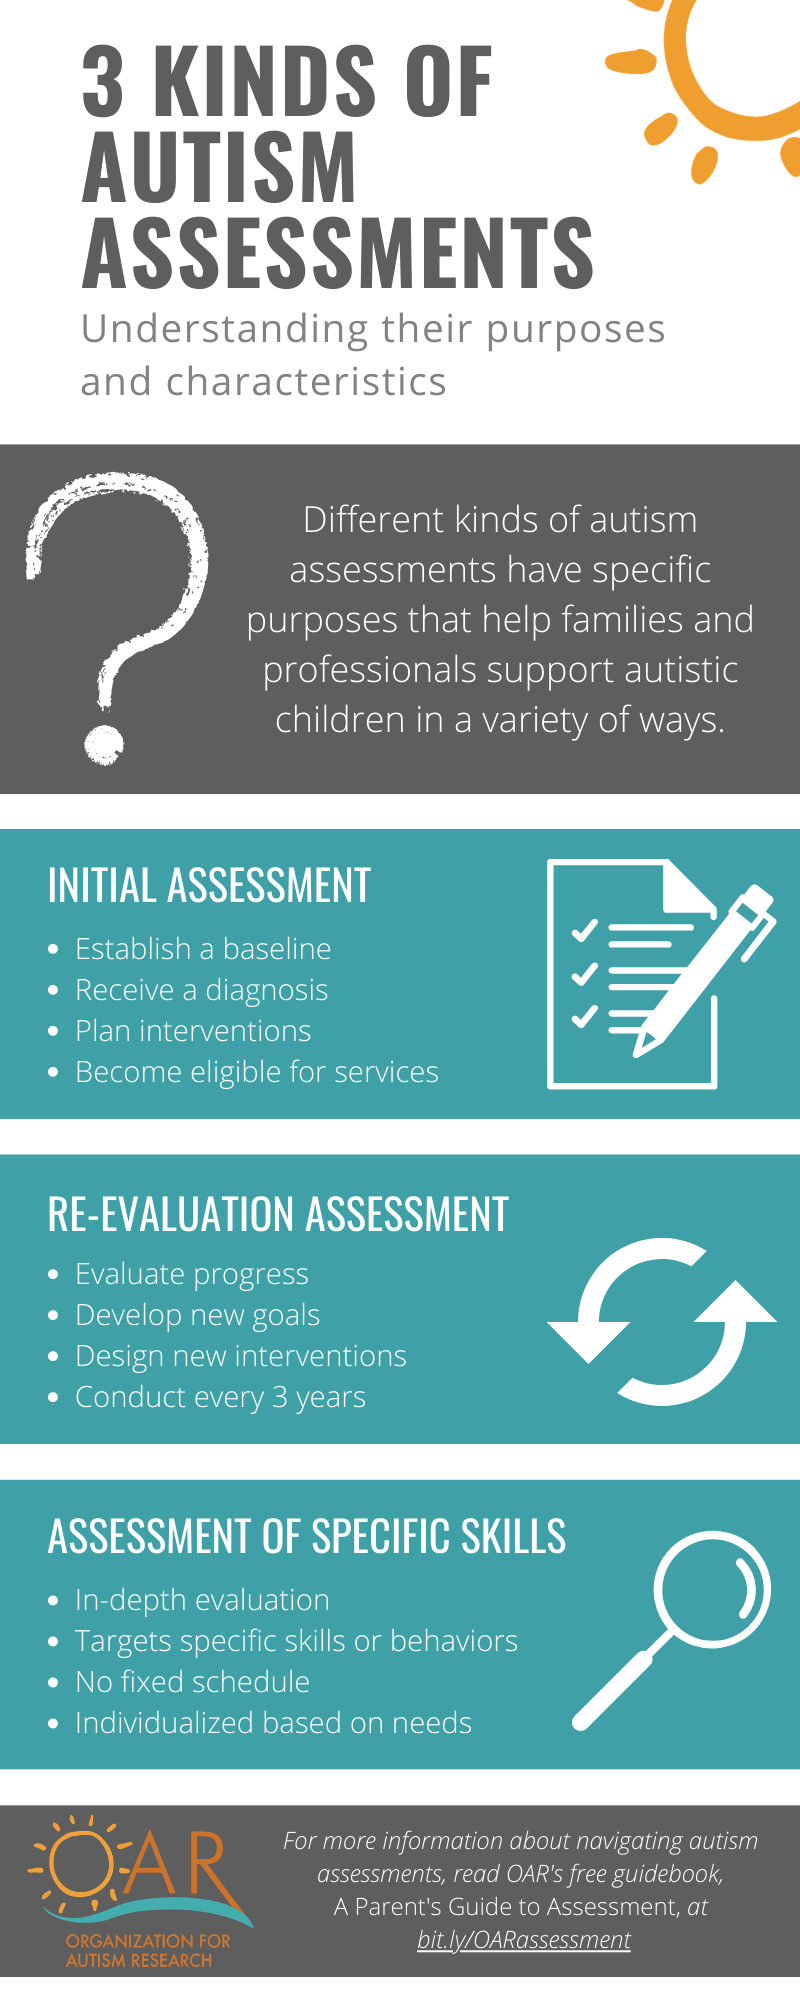 3 kinds of autism assessments